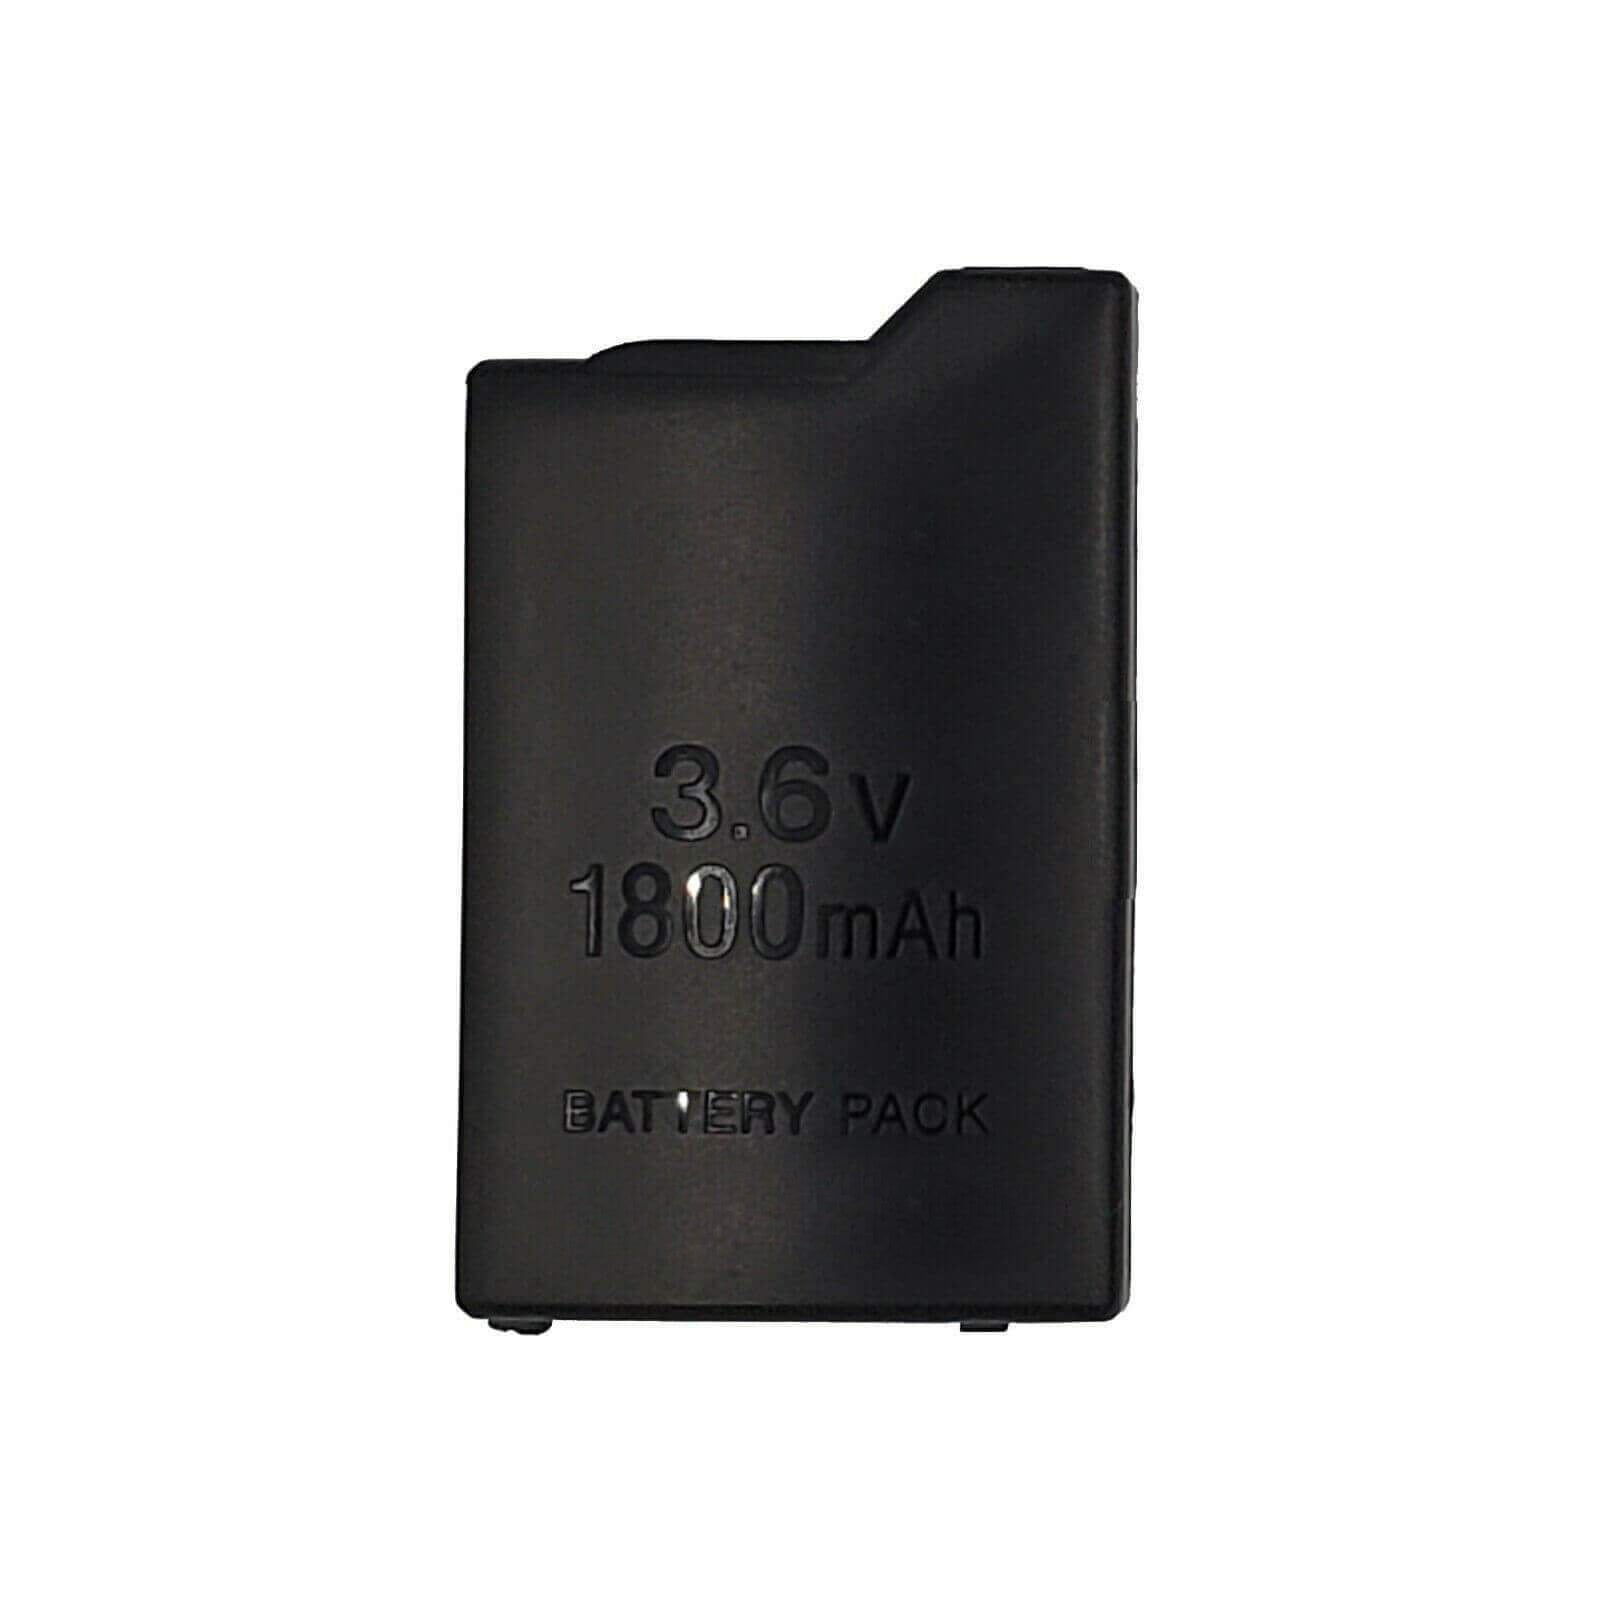 Replacement Battery For Sony PSP 1000 FAT Range PSP-110